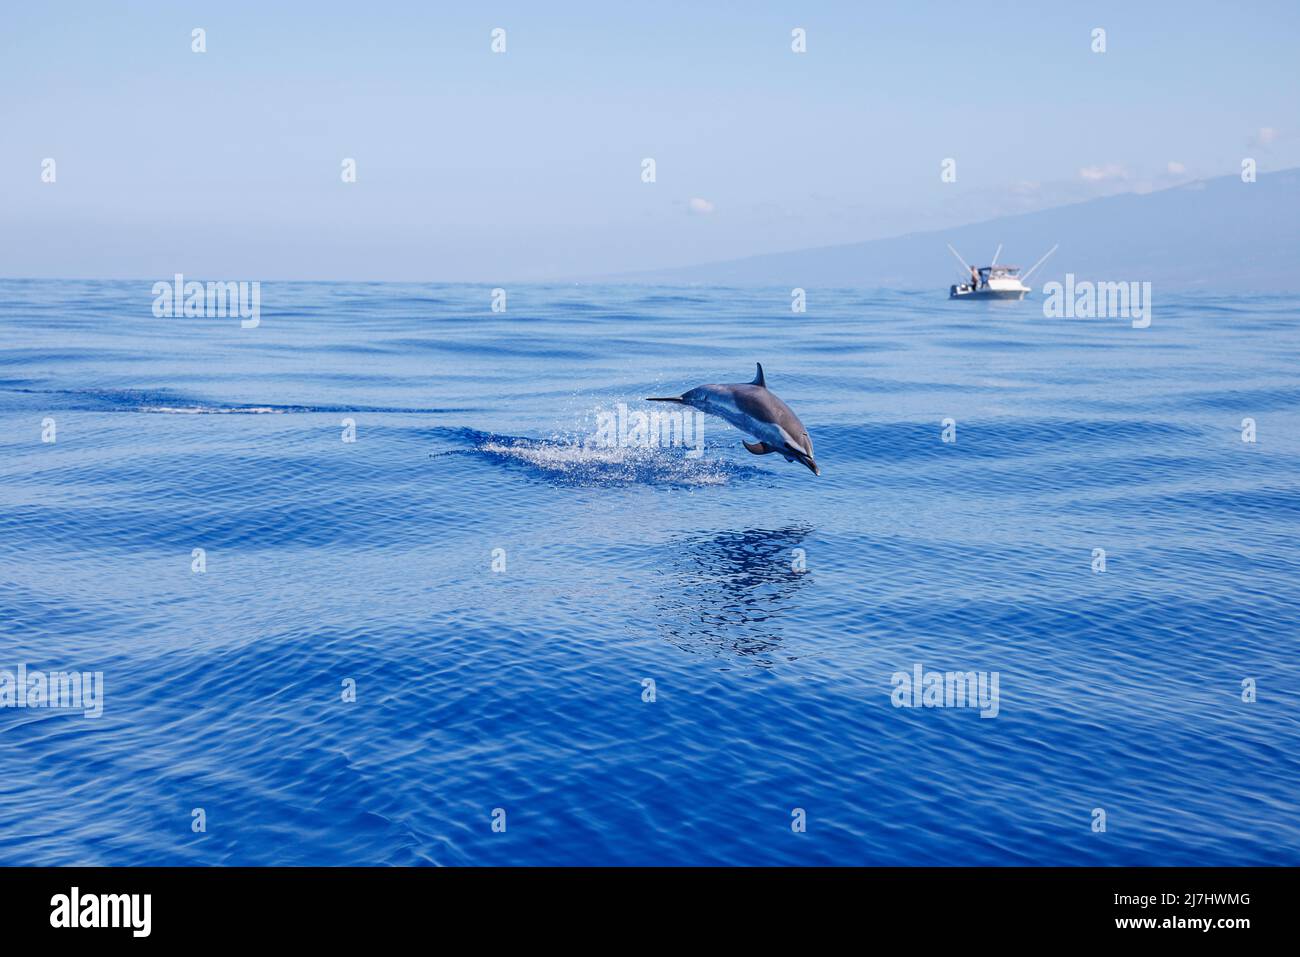 A pantropical spotted dolphin, Stenella attenuata, leaps out of the open Pacific near a fishing vessel off the Big Island of Hawaii, Pacific Ocean, Un Stock Photo